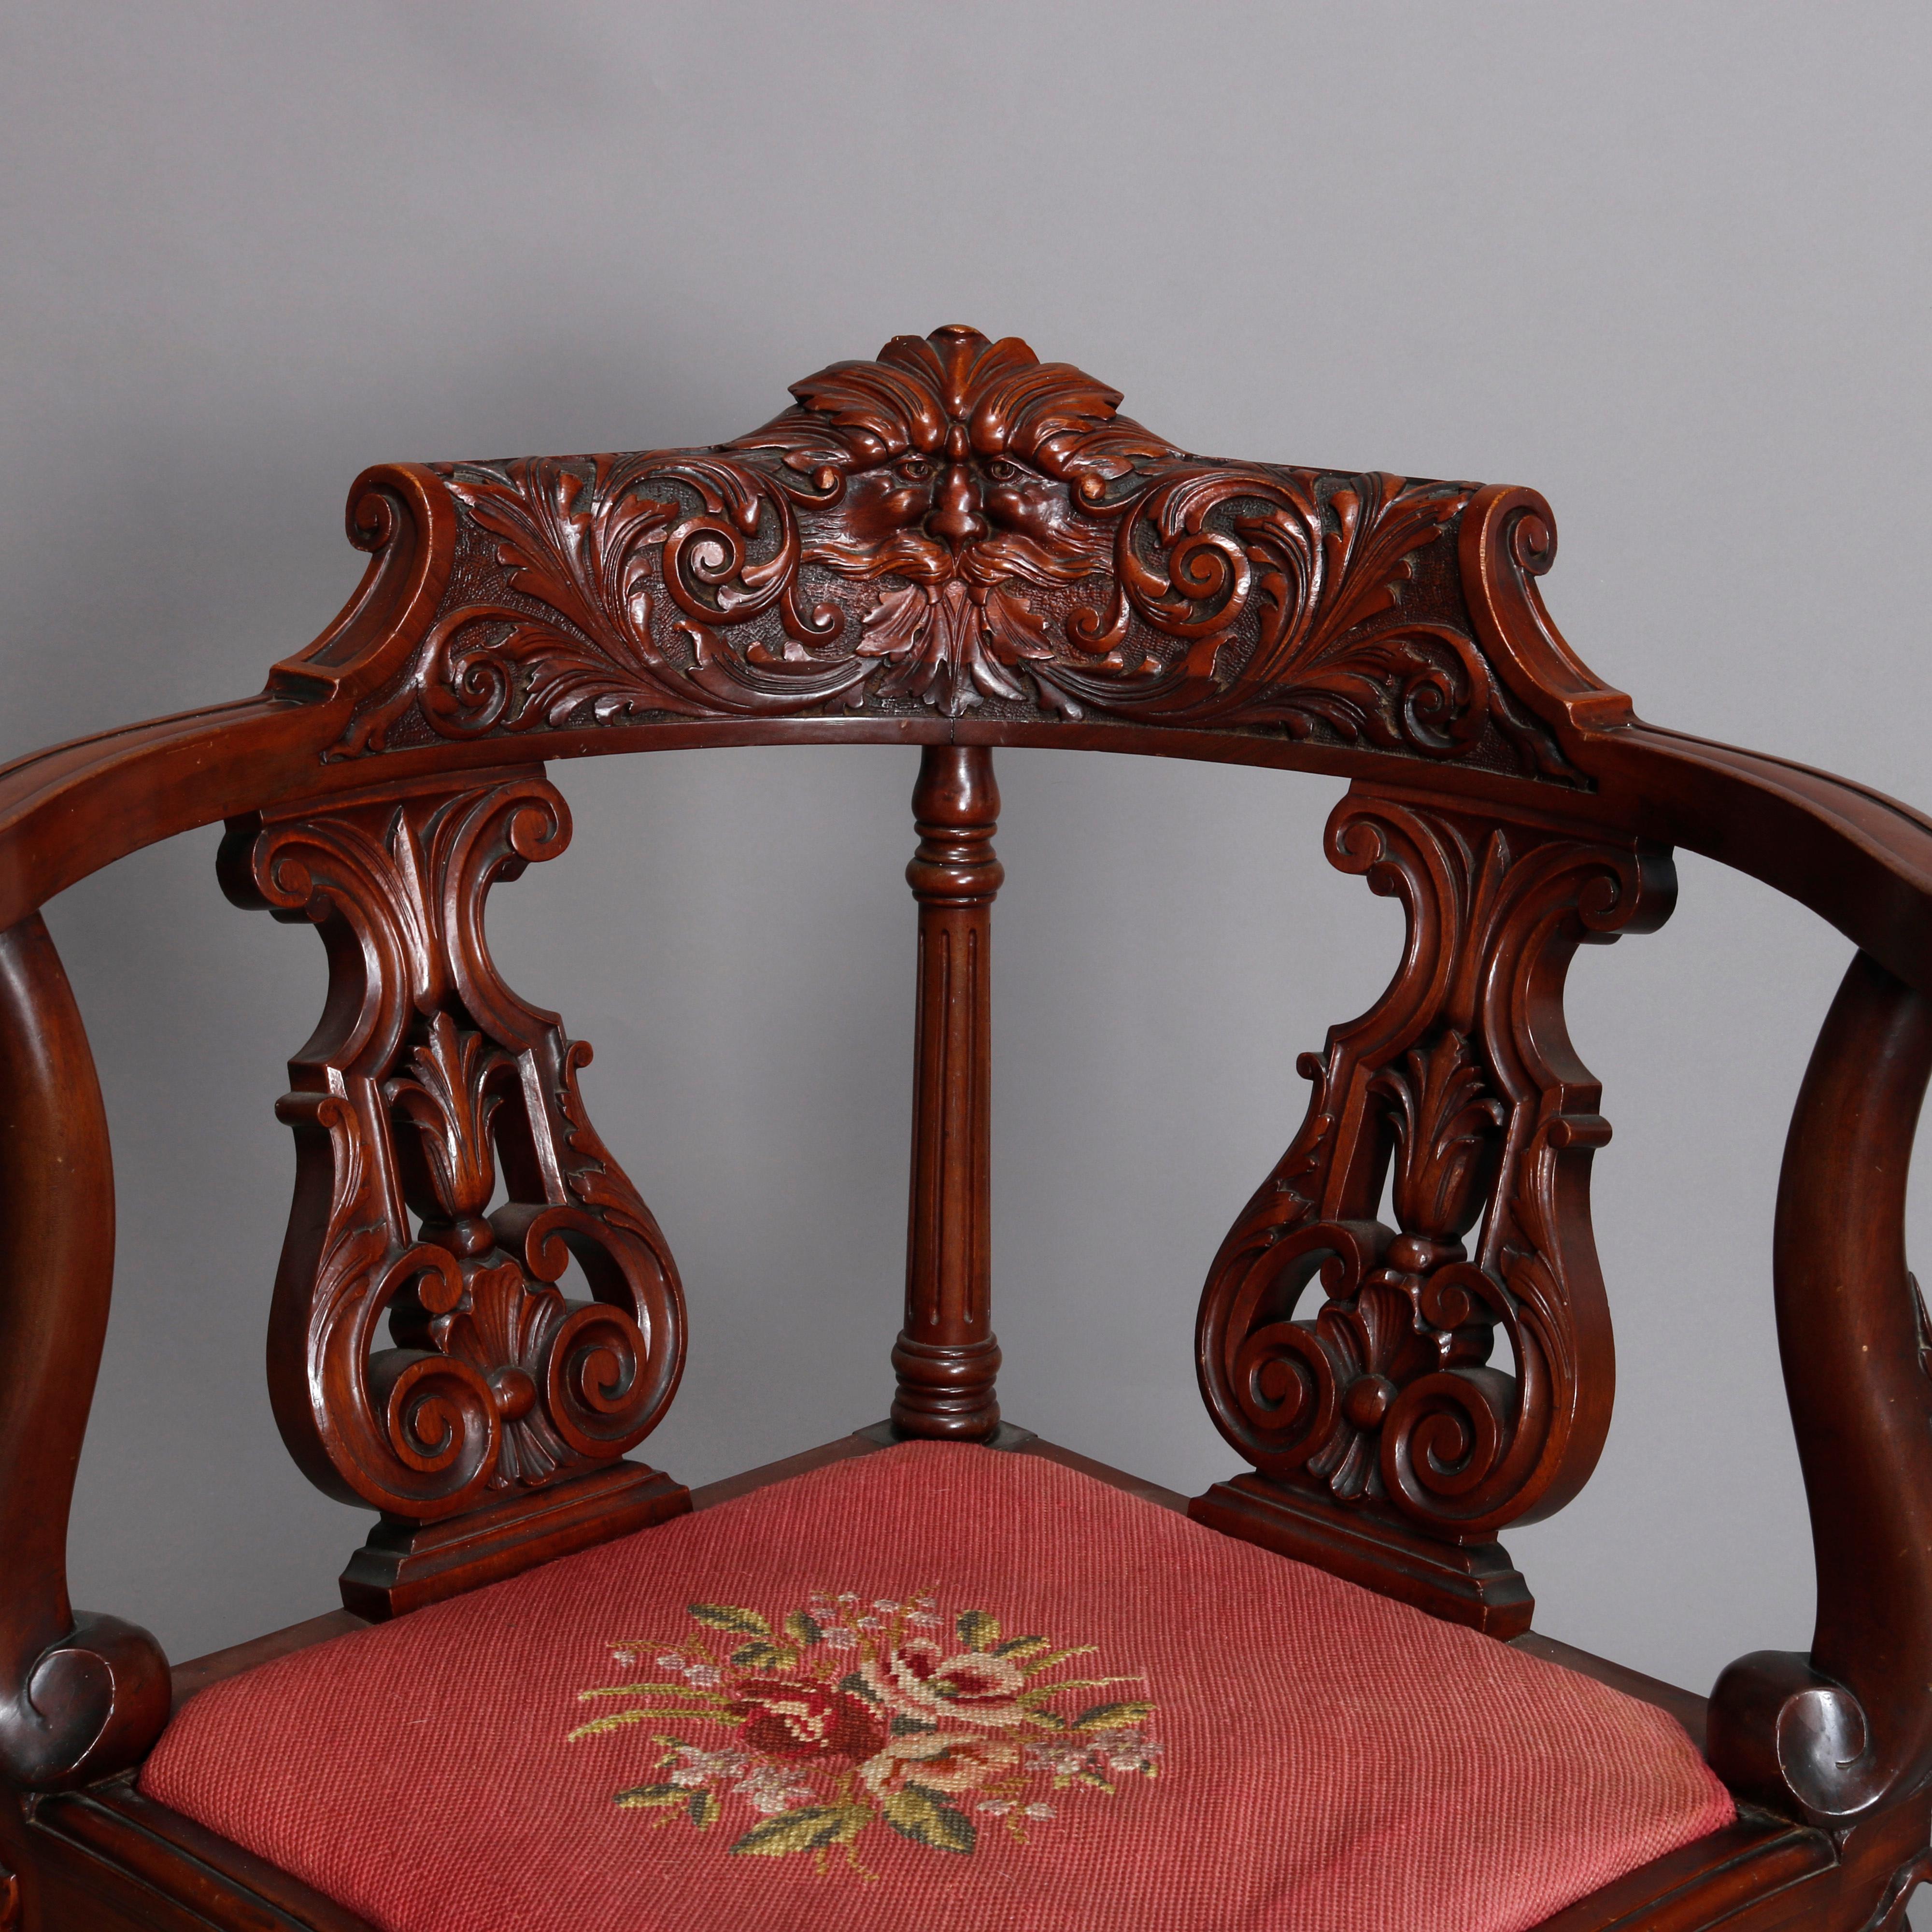 An antique corner chair by R. J Horner offers deeply carved mahogany construction with crest having North Wind face flanked by scroll and foliate decoration surmounting back having pierced urn form and turned elements, scroll form arms with scroll